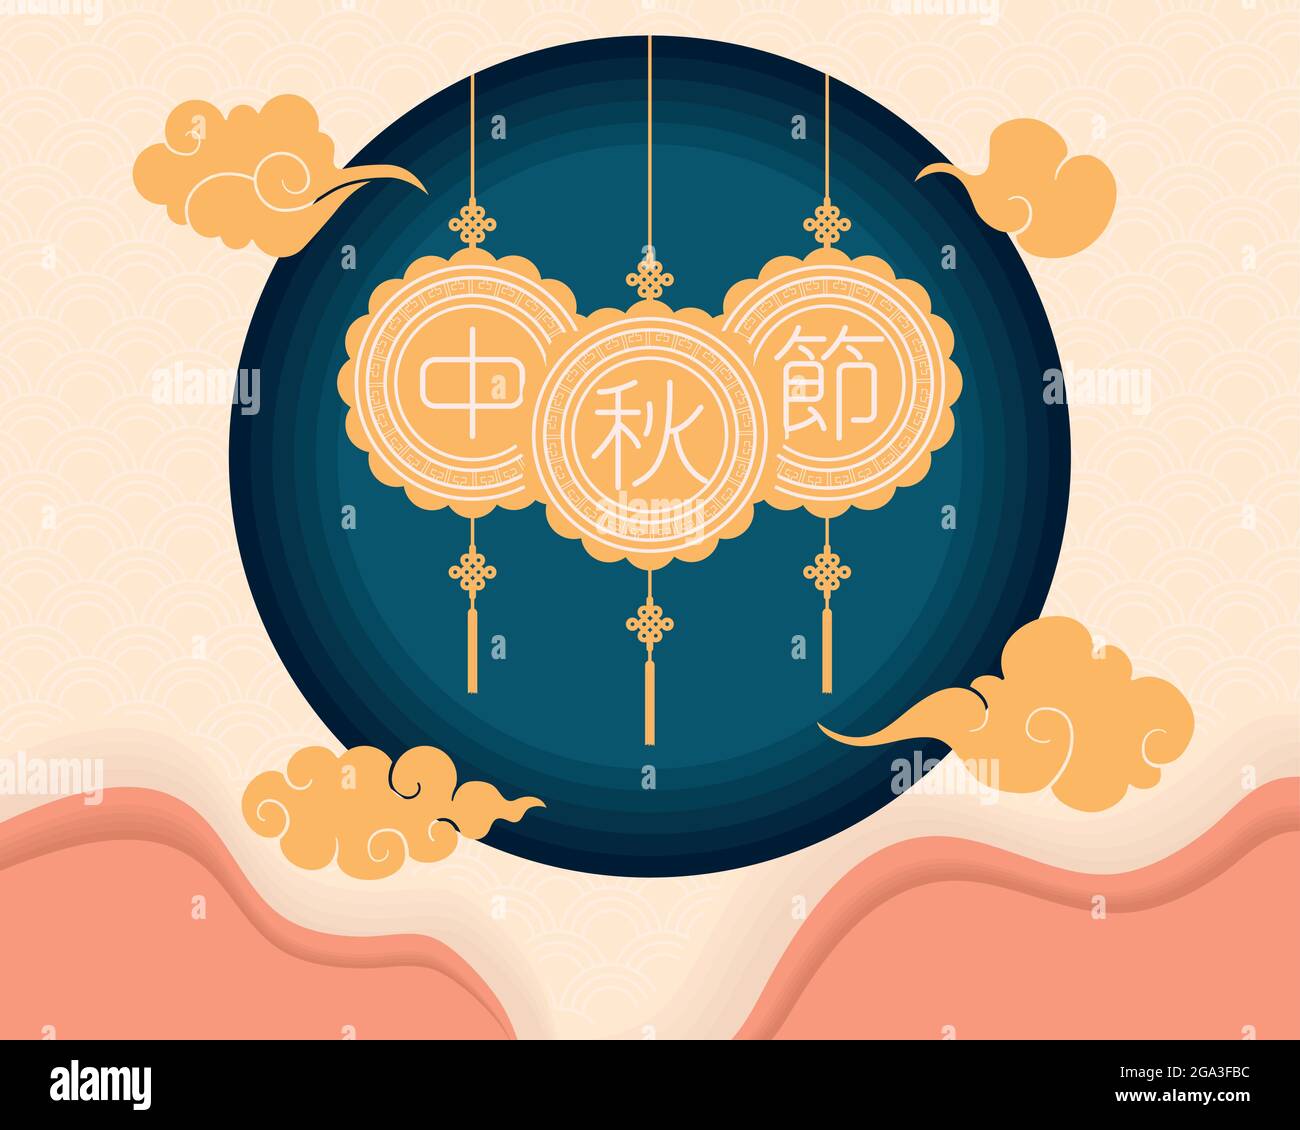 chinese Moon festival golden laces Stock Vector